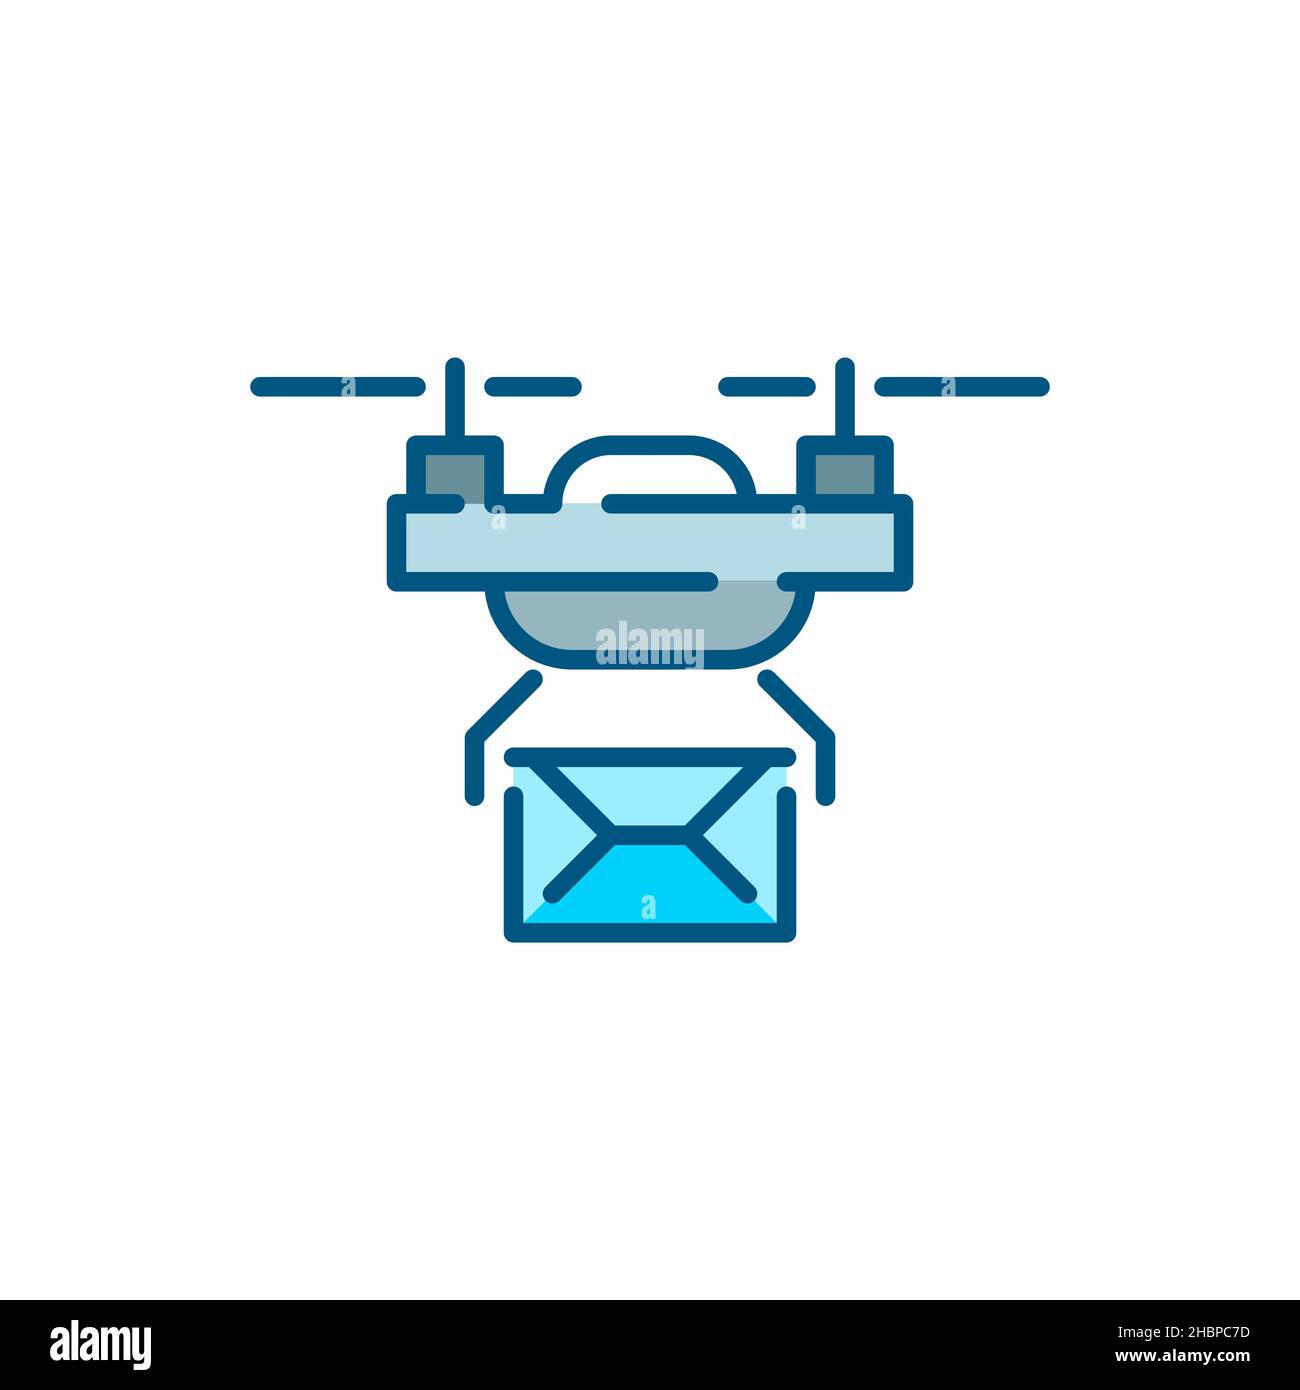 Drone delivering a letter. Unmanned automatic aircraft used for transporting goods. Pixel perfect, editable stroke colorful icon Stock Vector